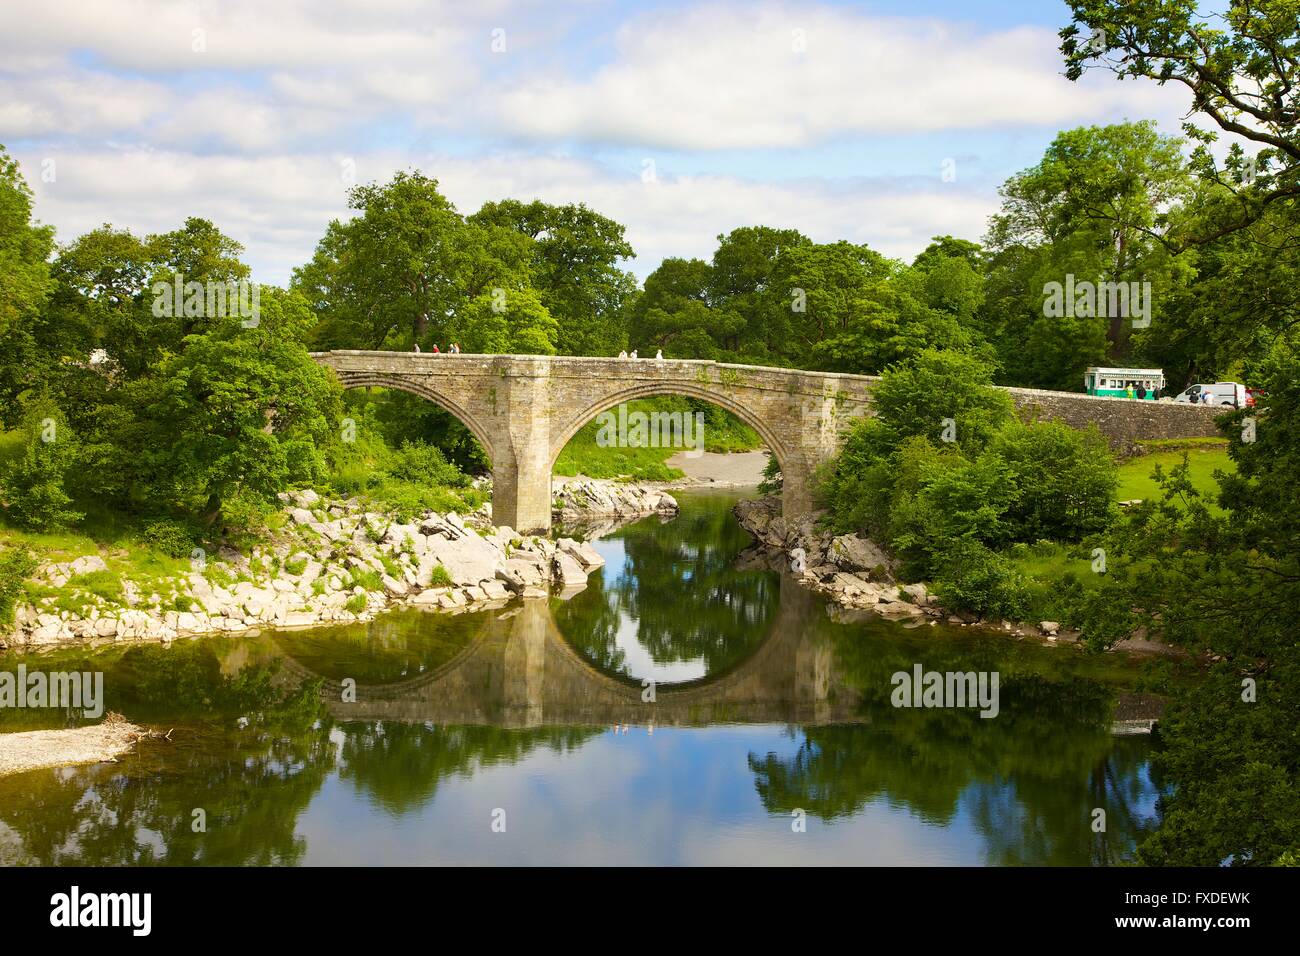 Devil's Bridge over the River Lune. Constructed around 1370. Kirkby Lonsdale, South Lakeland, Cumbria, England, United Kingdom. Stock Photo